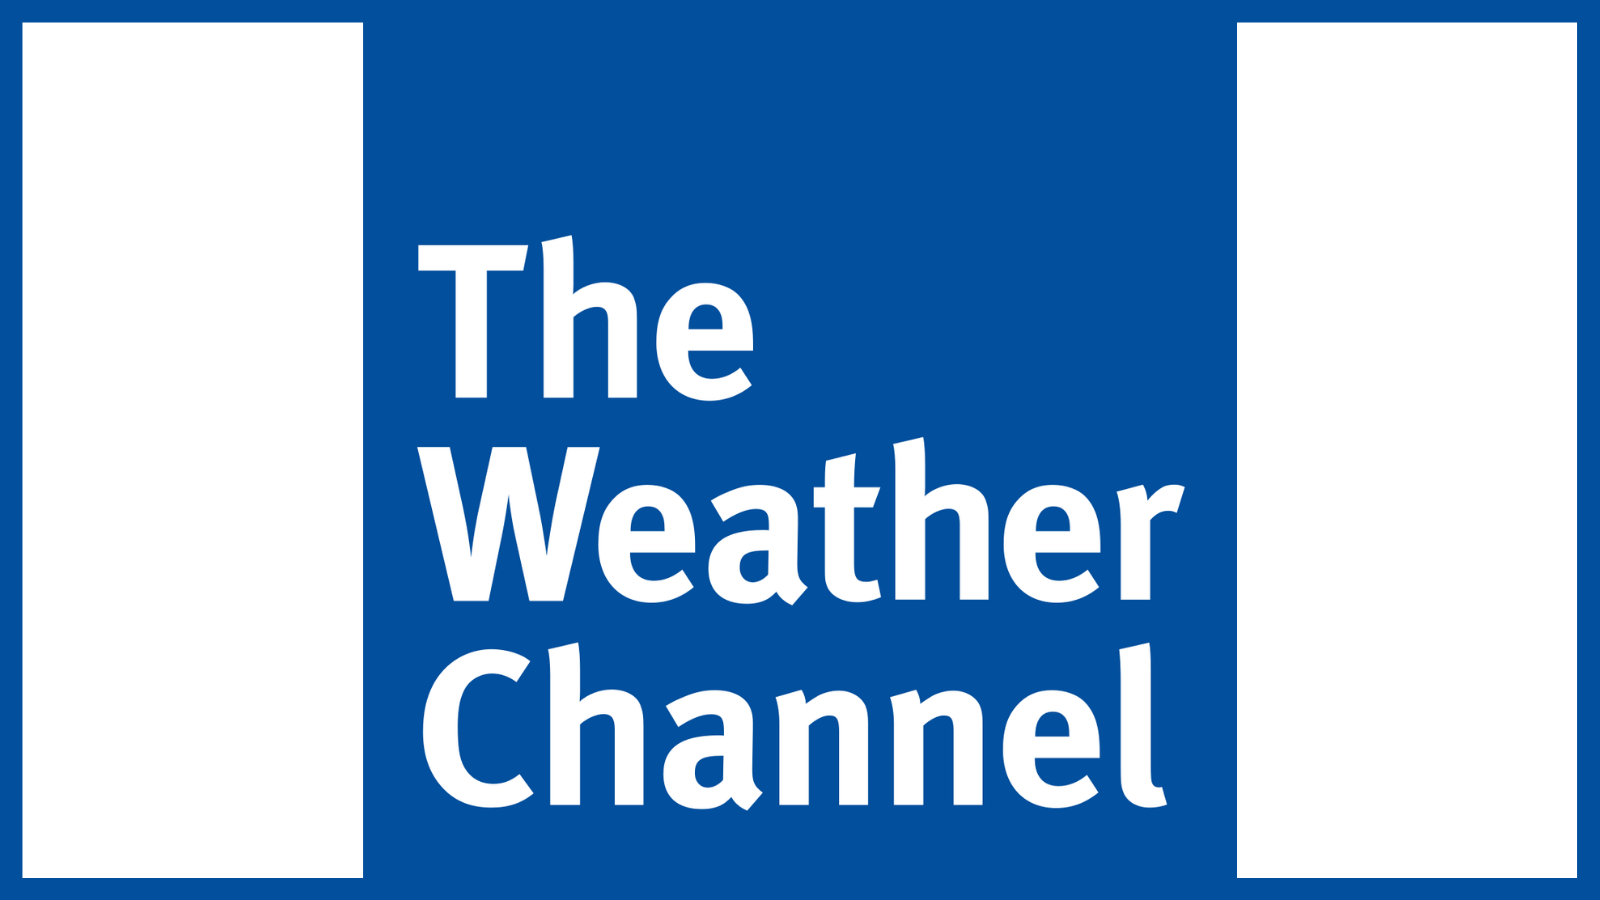 how to get the weather channel without cable